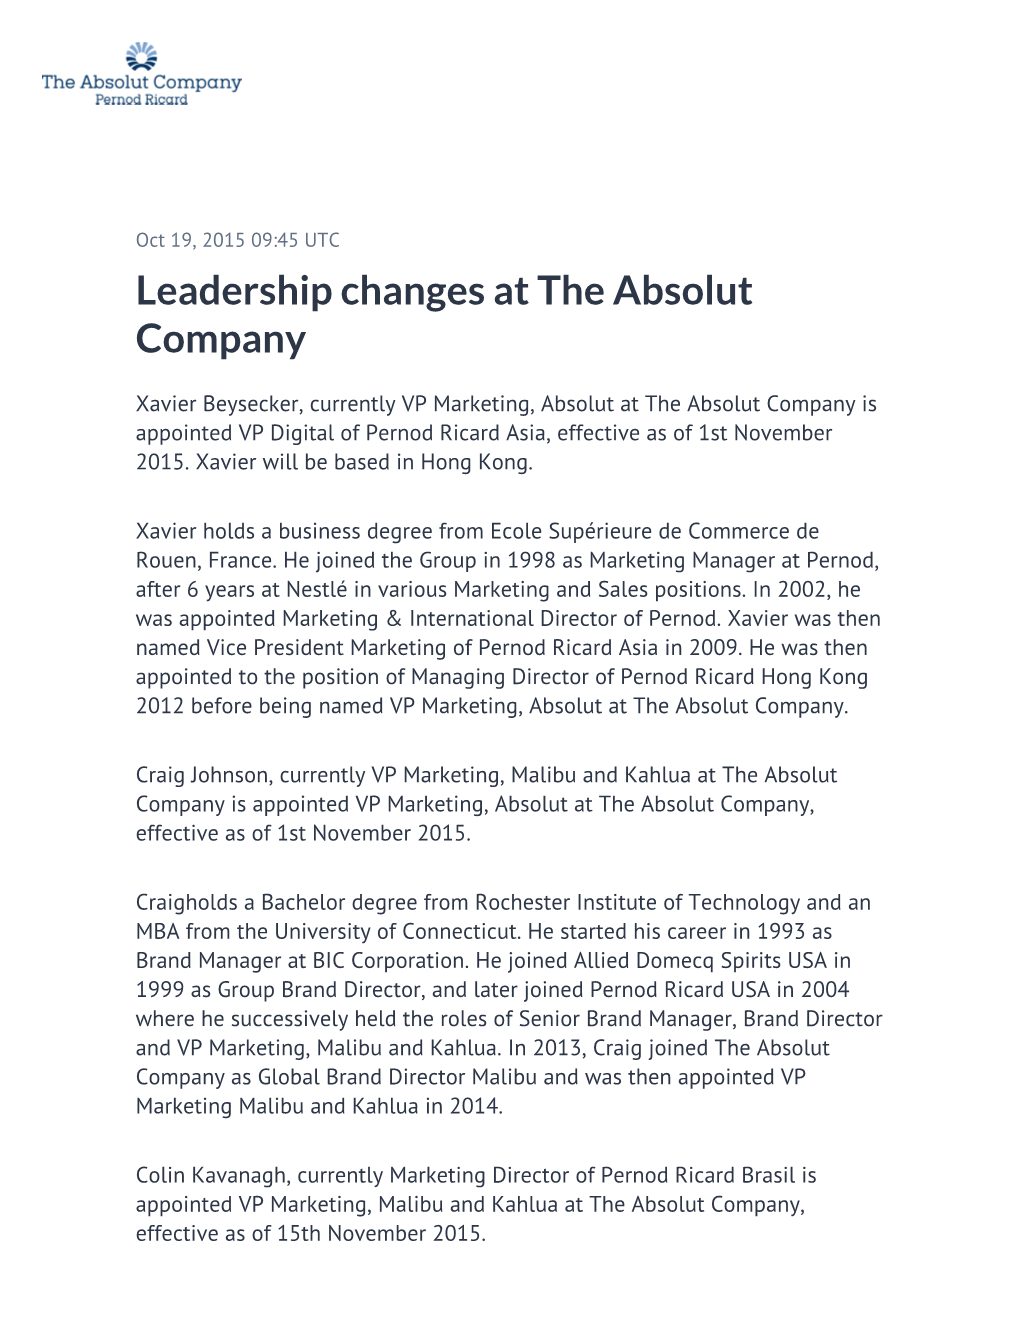 Leadership Changes at the Absolut Company